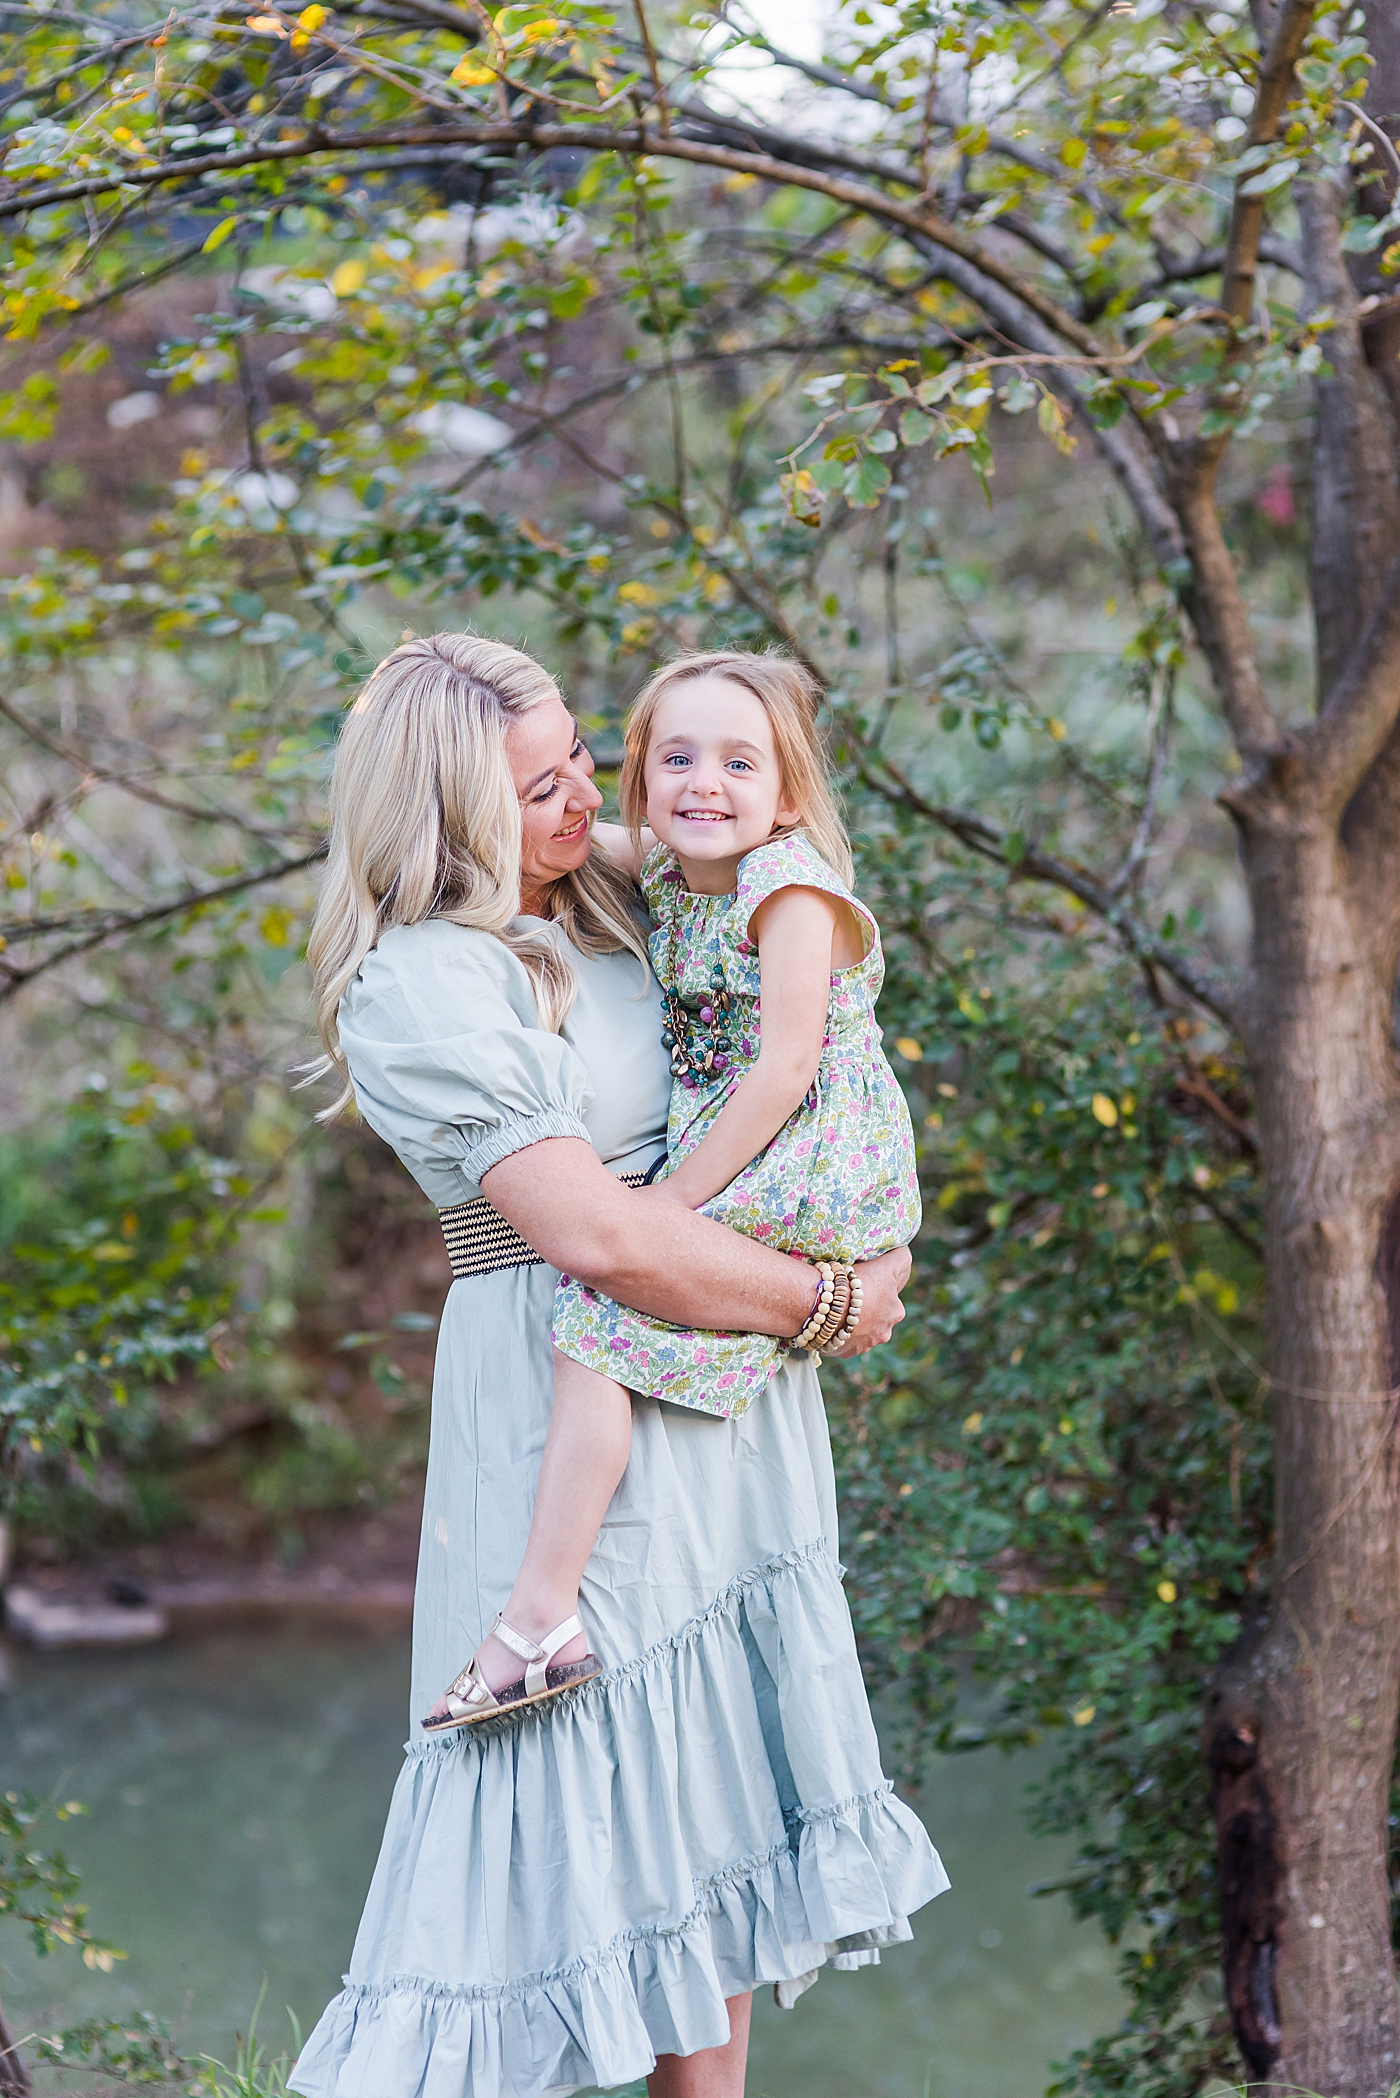 Mom and daughter talking together in the park | Photo by Charlotte Family Photographer Anna Wisjo